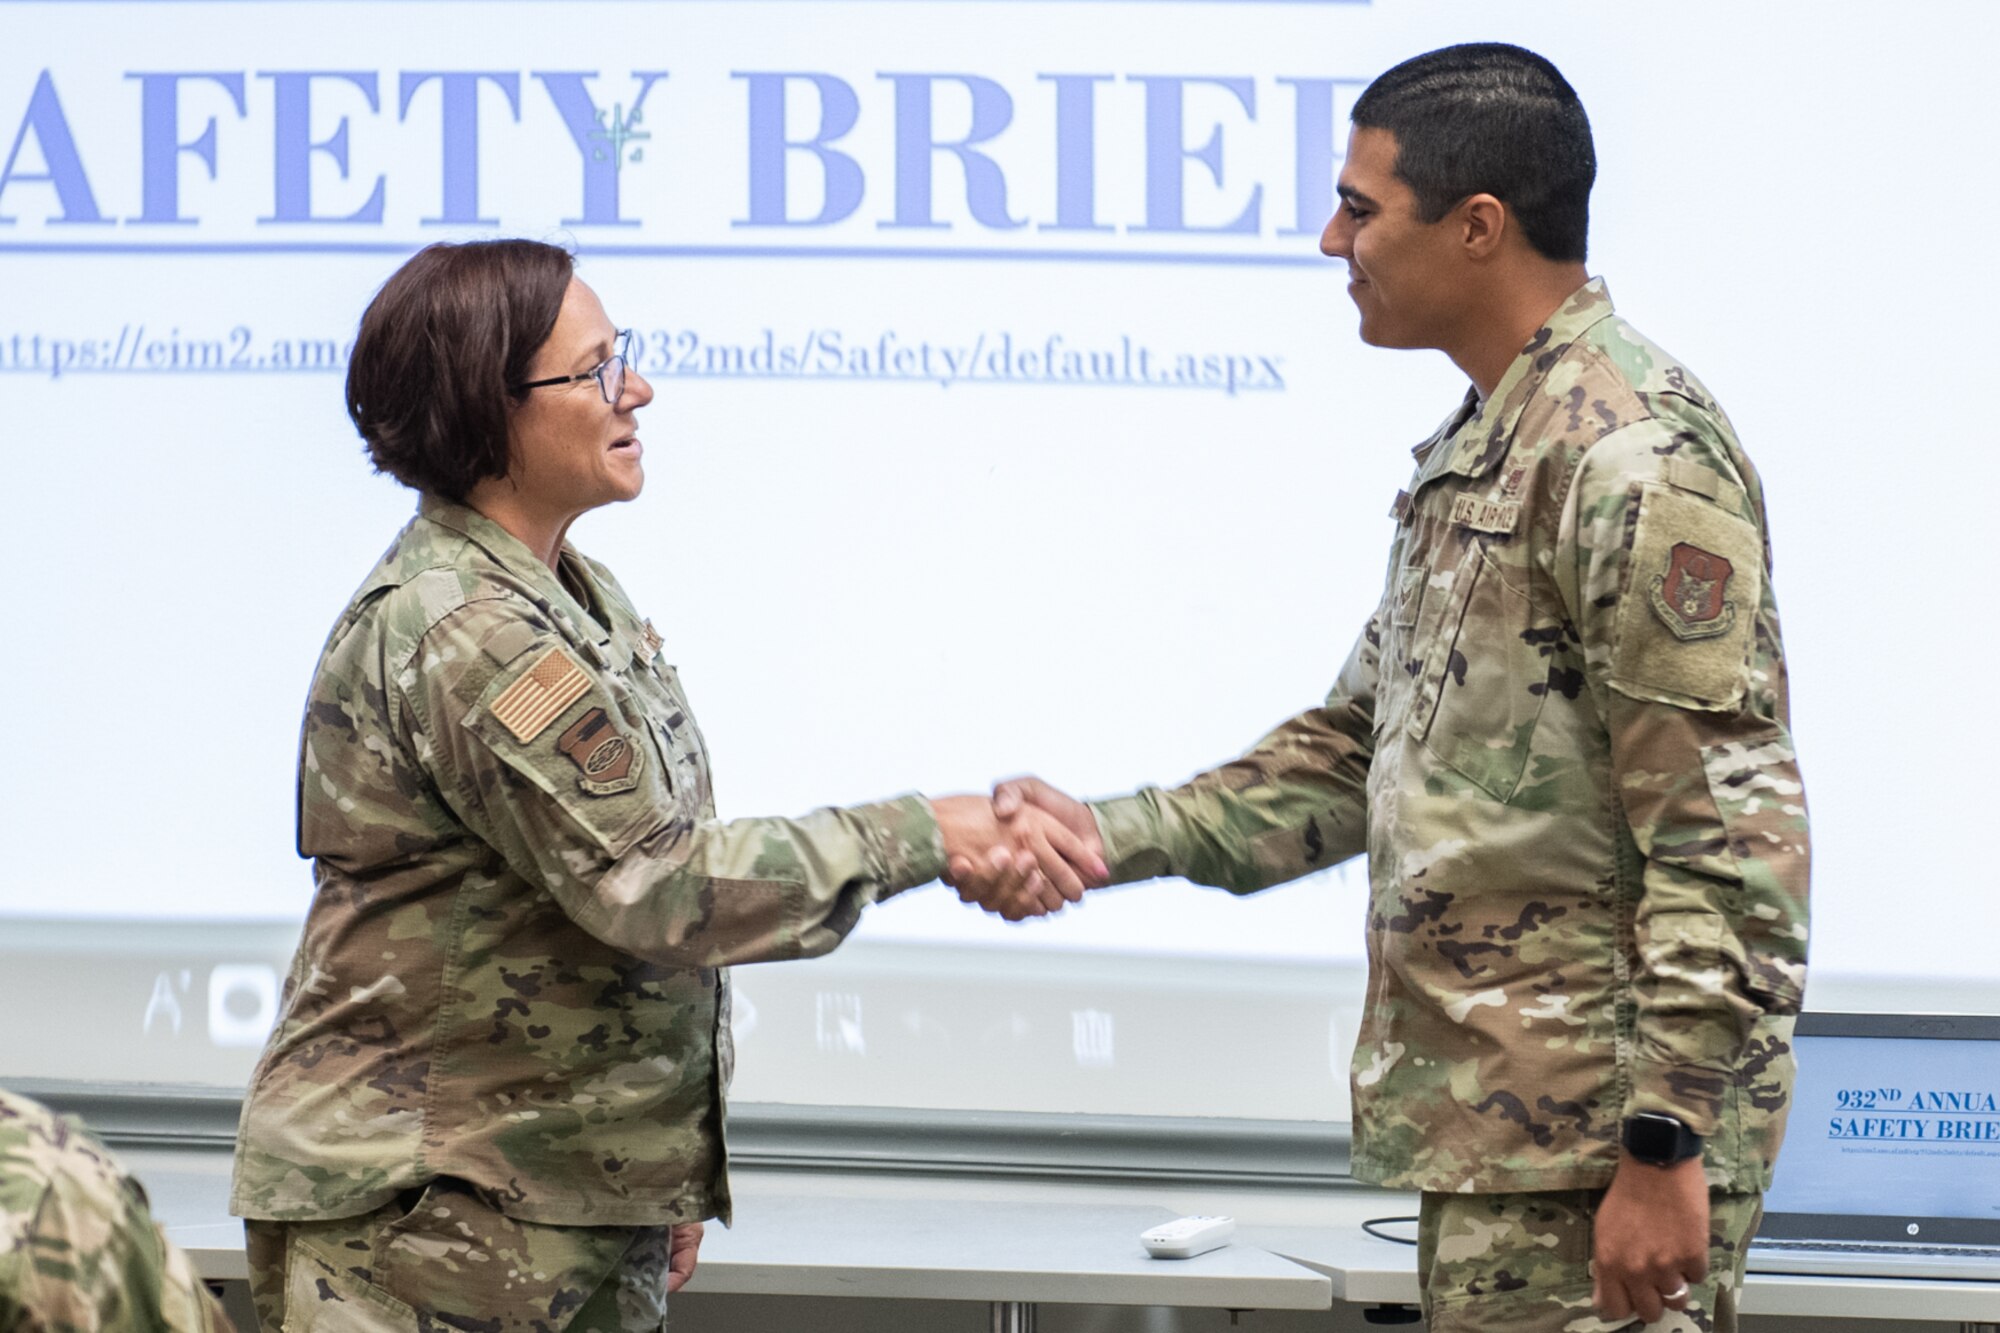 Lt. Col. Julie Novy, 932nd Airlift Wing, Inspector General Office, presents Senior Airman Warren McKeithen, 932nd AW, Medical Group, with an Inspector General coin at Scott Air Force Base, Illinois, July 10, 2021. During an active shooter drill McKeithen efficiently conducted a recall of the unit and realized there was a member who was non responsive. They simulated a death of a member and he was able to relay that one of his members was on base and was not found to the wing. McKeithen reacted to the situation properly unlike many units before him, earning him the IG coin! (U.S. Air Force Photo by Staff Sgt. Brooke Spenner)